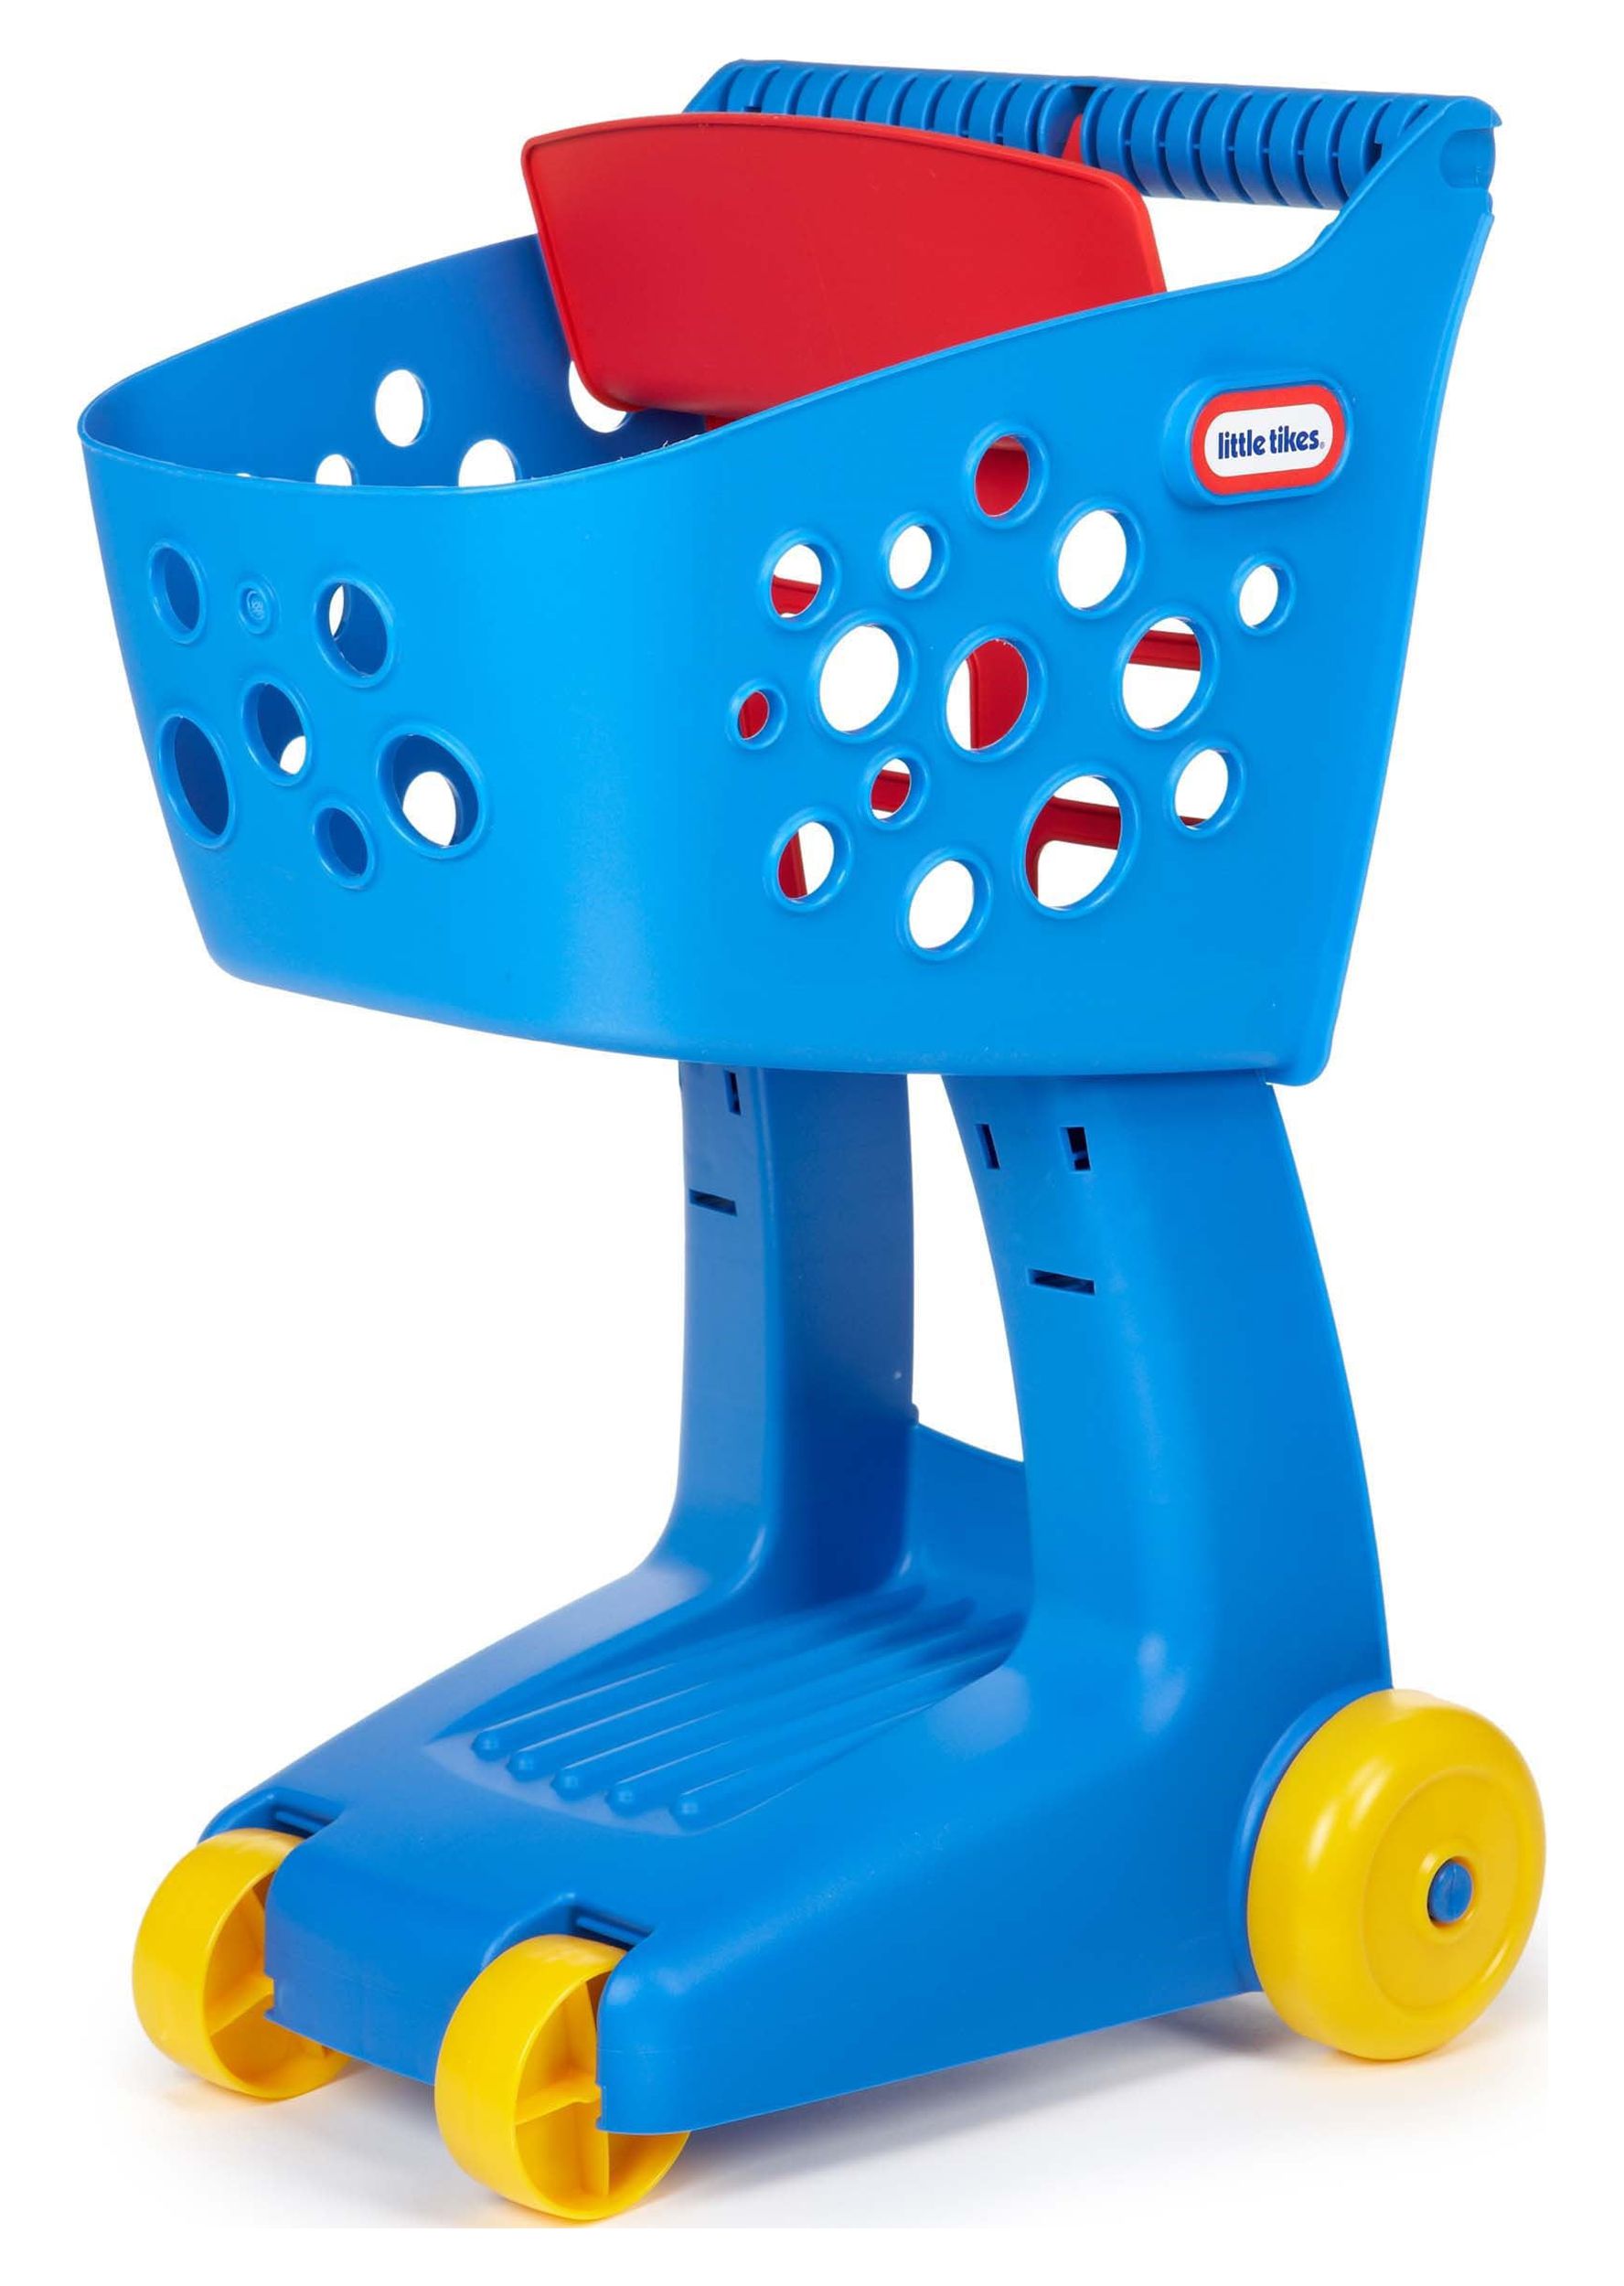 Little Tikes Lil Shopper - Blue For Girls and Boys Ages 1 Year + - image 1 of 5